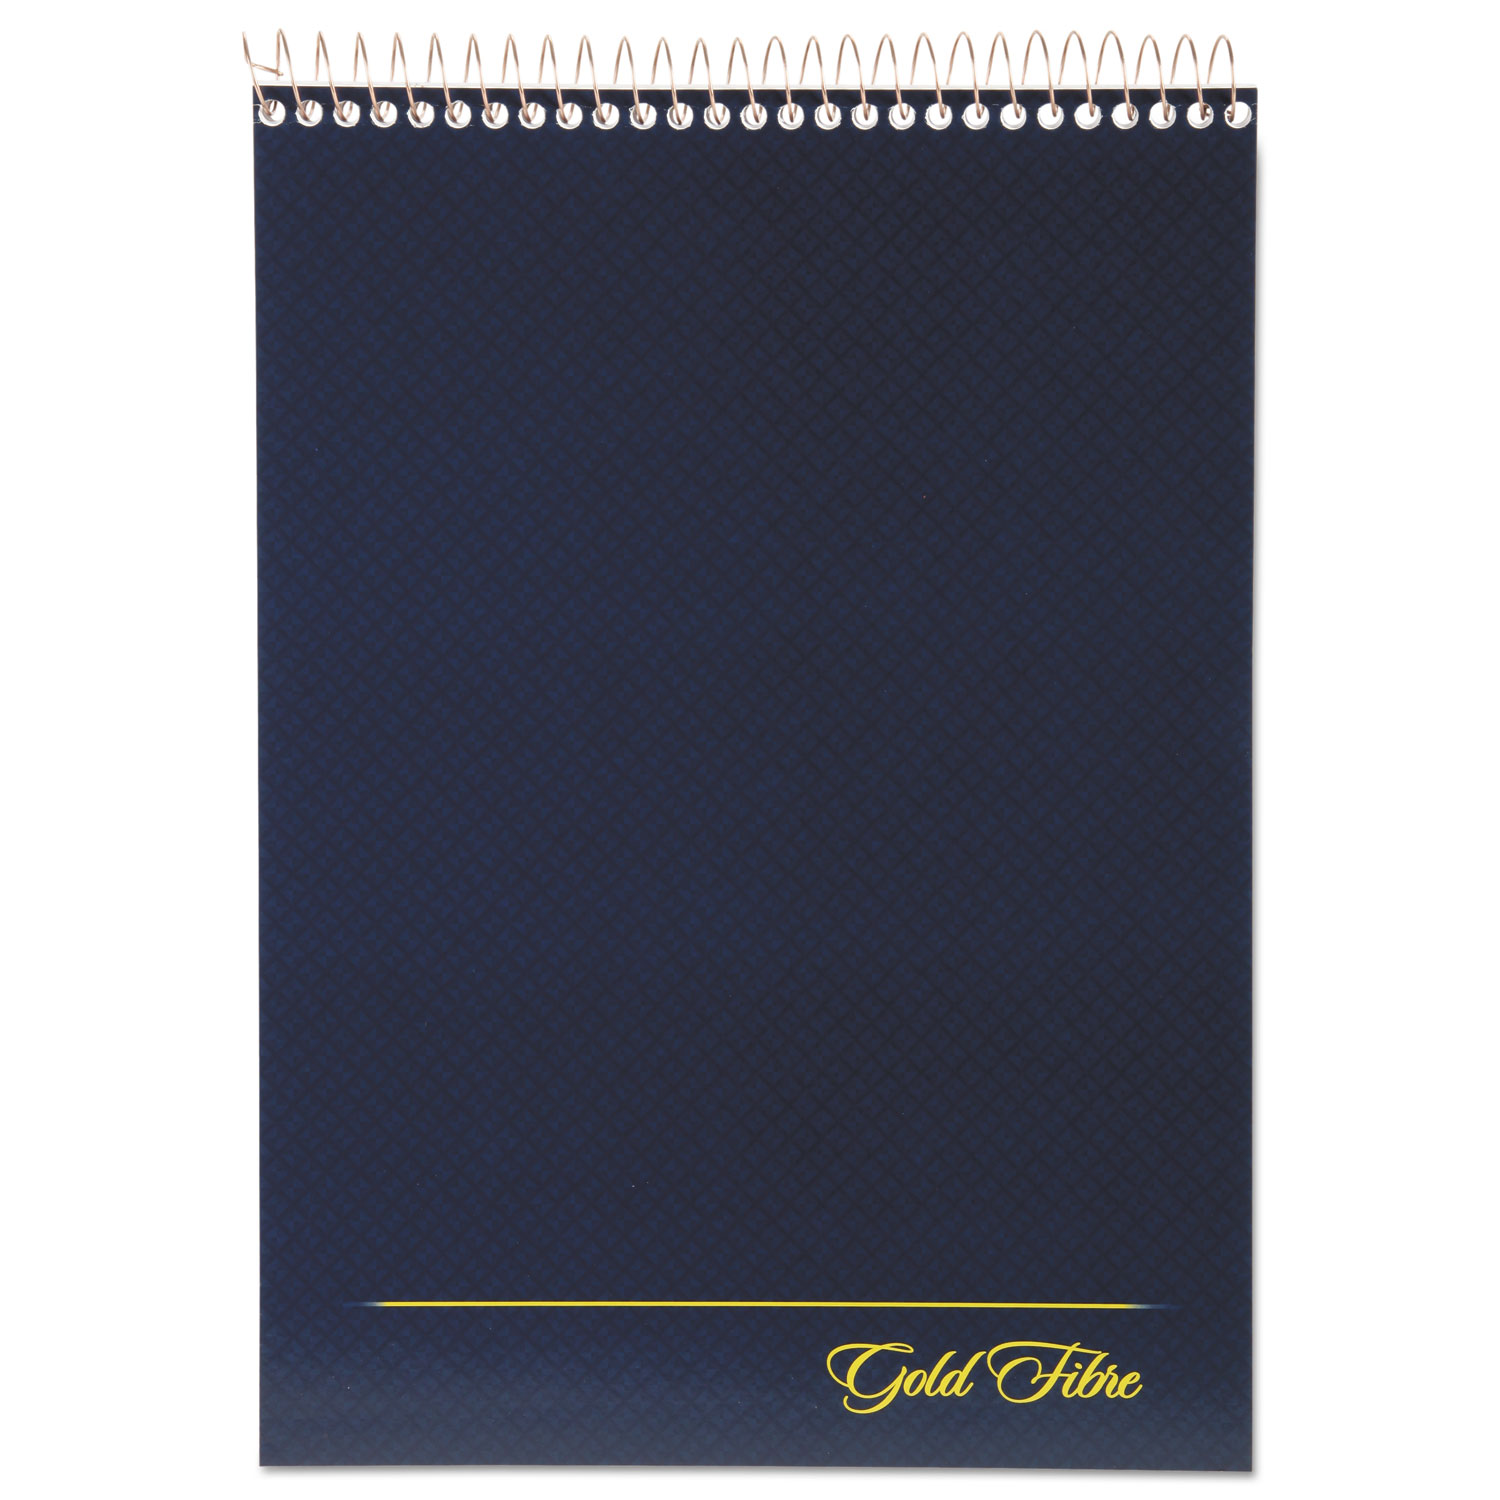 Gold Fibre Wirebound Writing Pad w/Cover, 8 1/2 x 11 3/4, White, Navy Cover